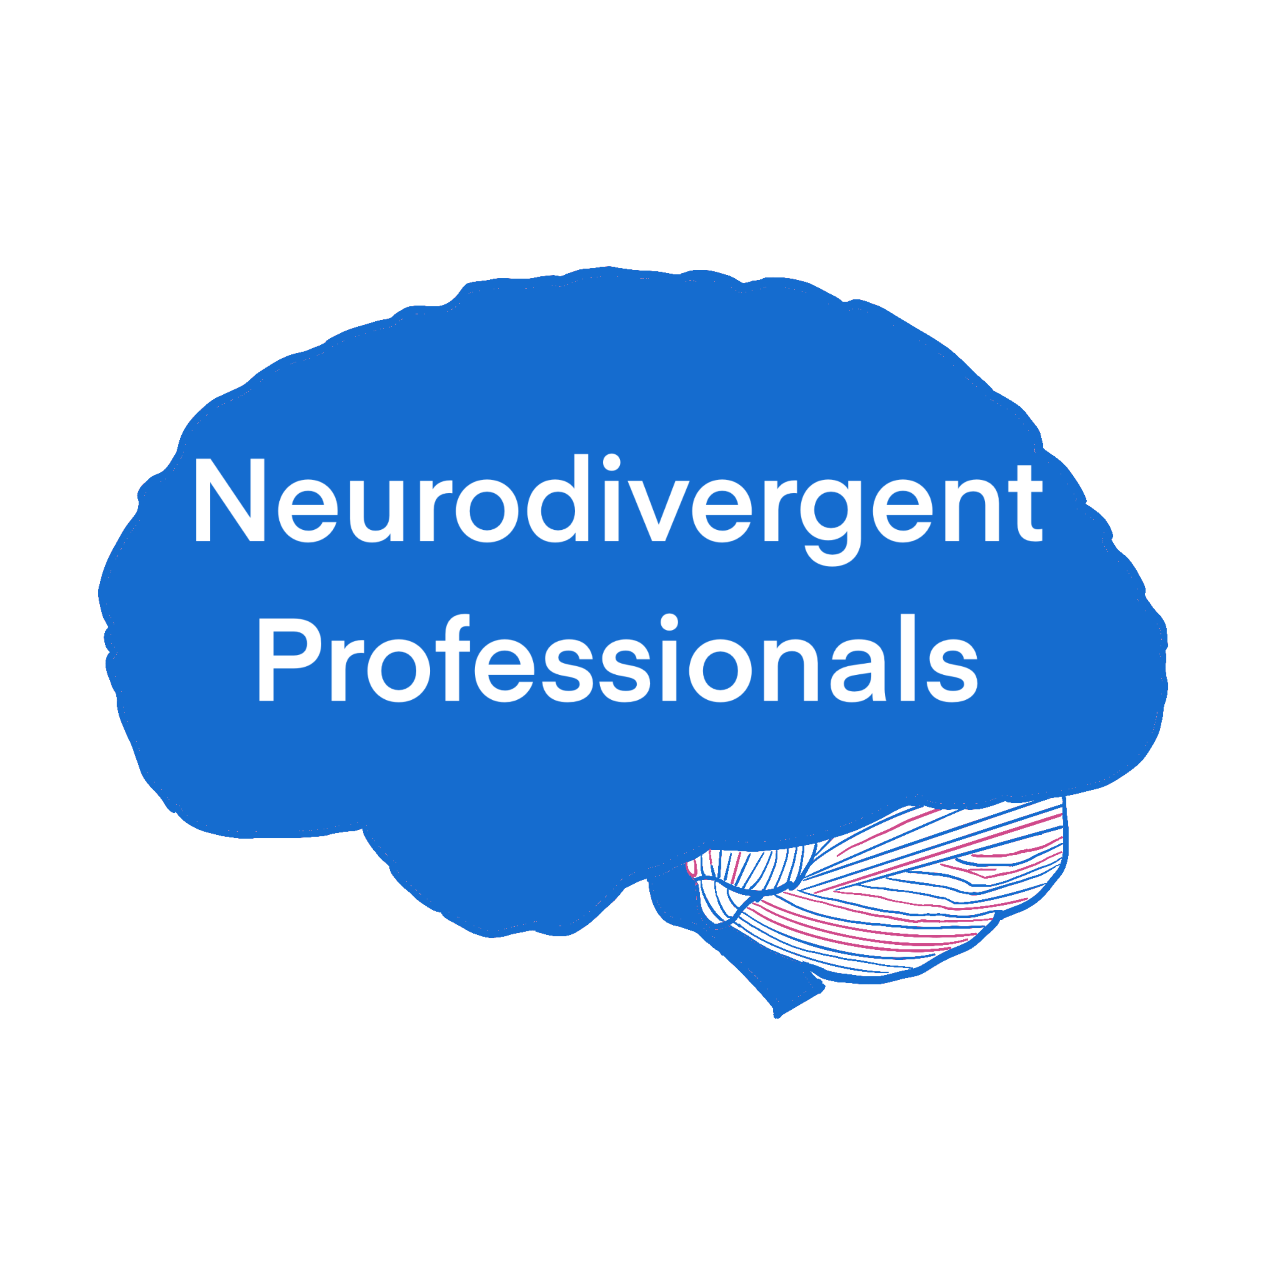 Image of an outline of a brain, coloured in blue with the words 'Neurodivergent professionals' written on it.